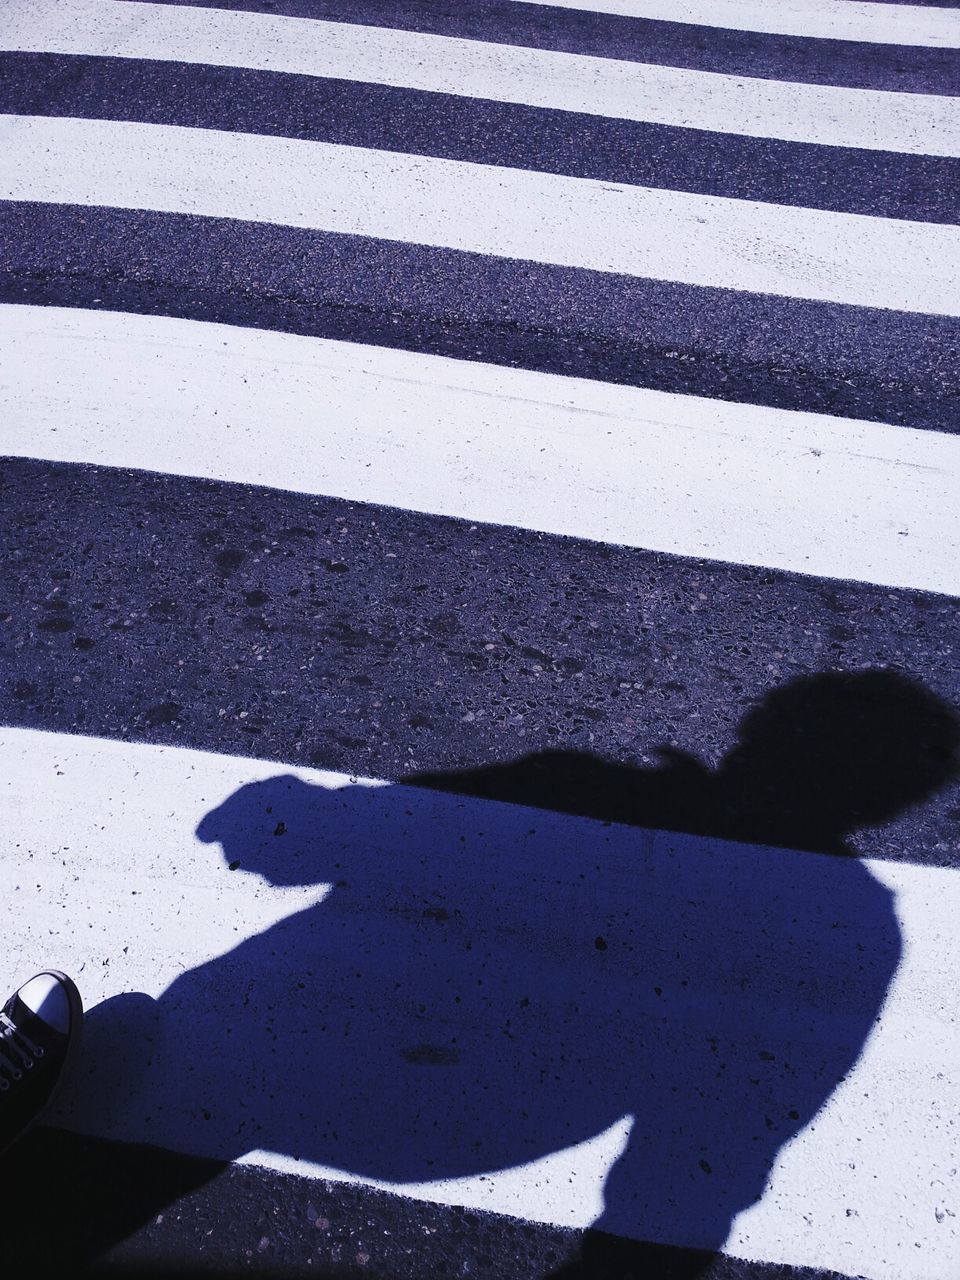 Close-up of shadow on the road